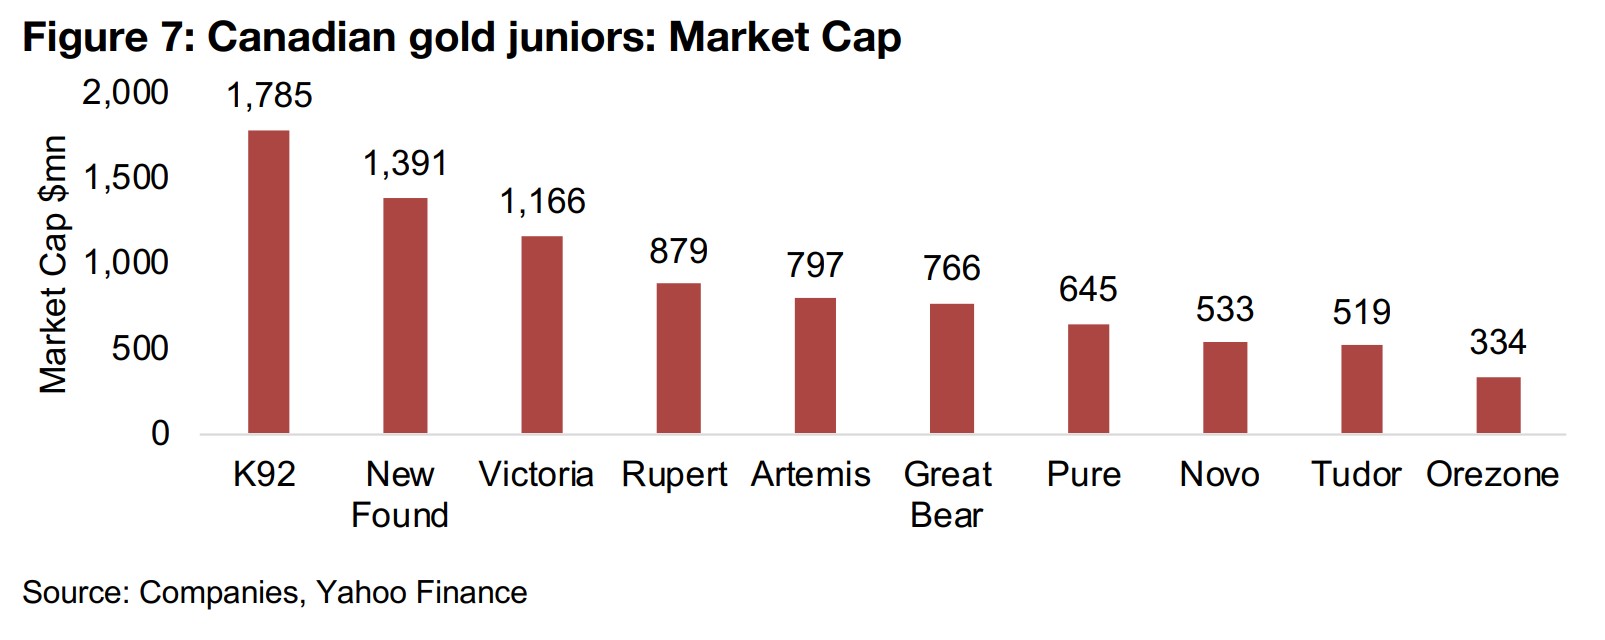 2) TSXV Juniors: Gold, silver and base metals